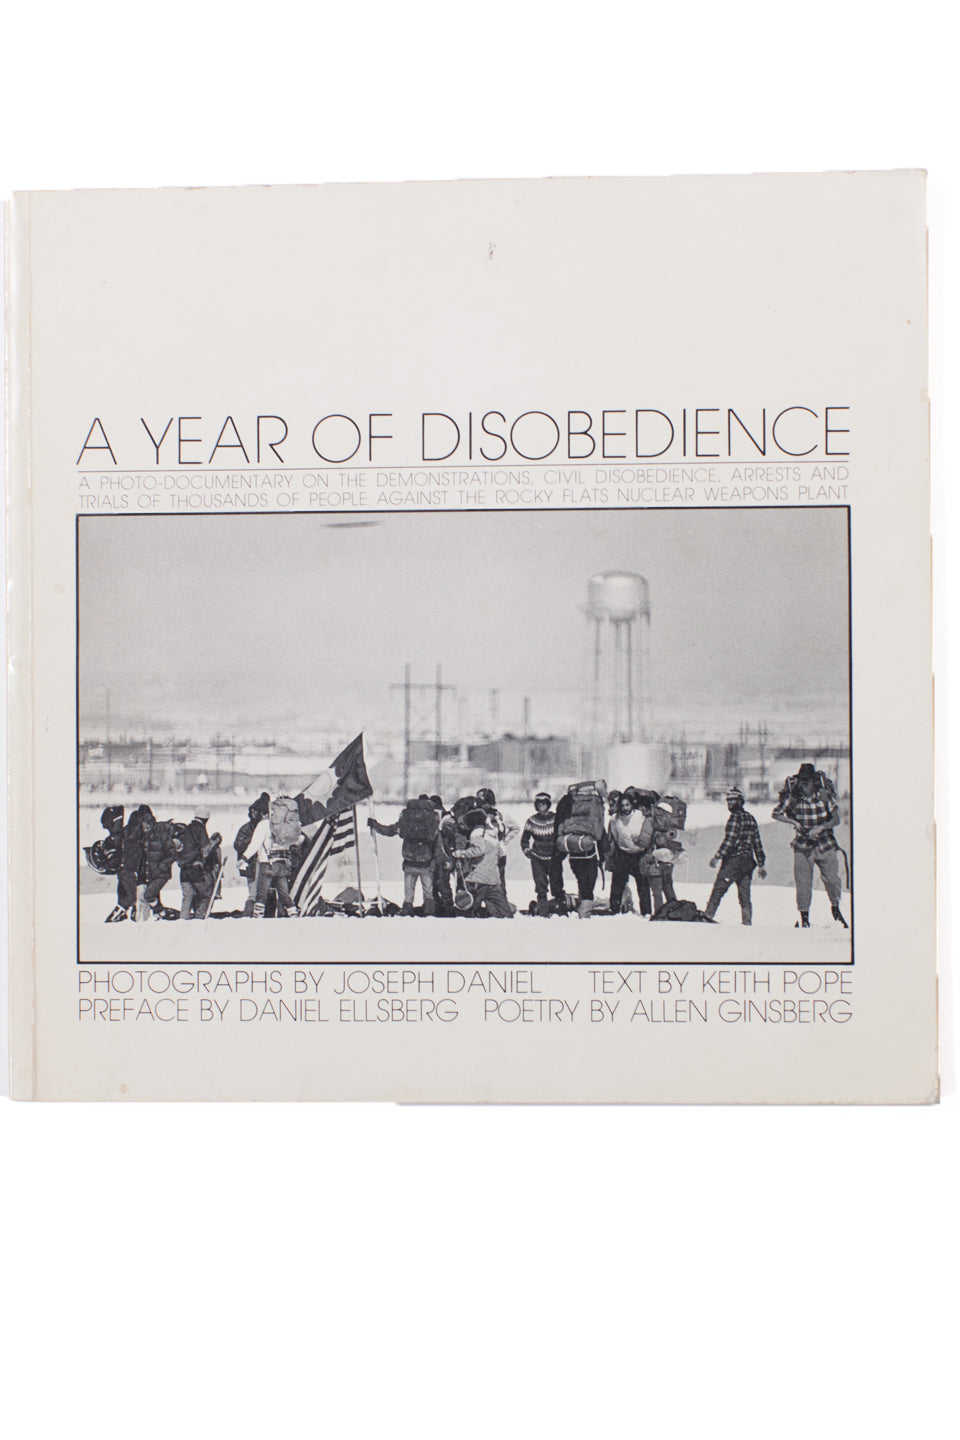 A YEAR OF DISOBEDIENCE